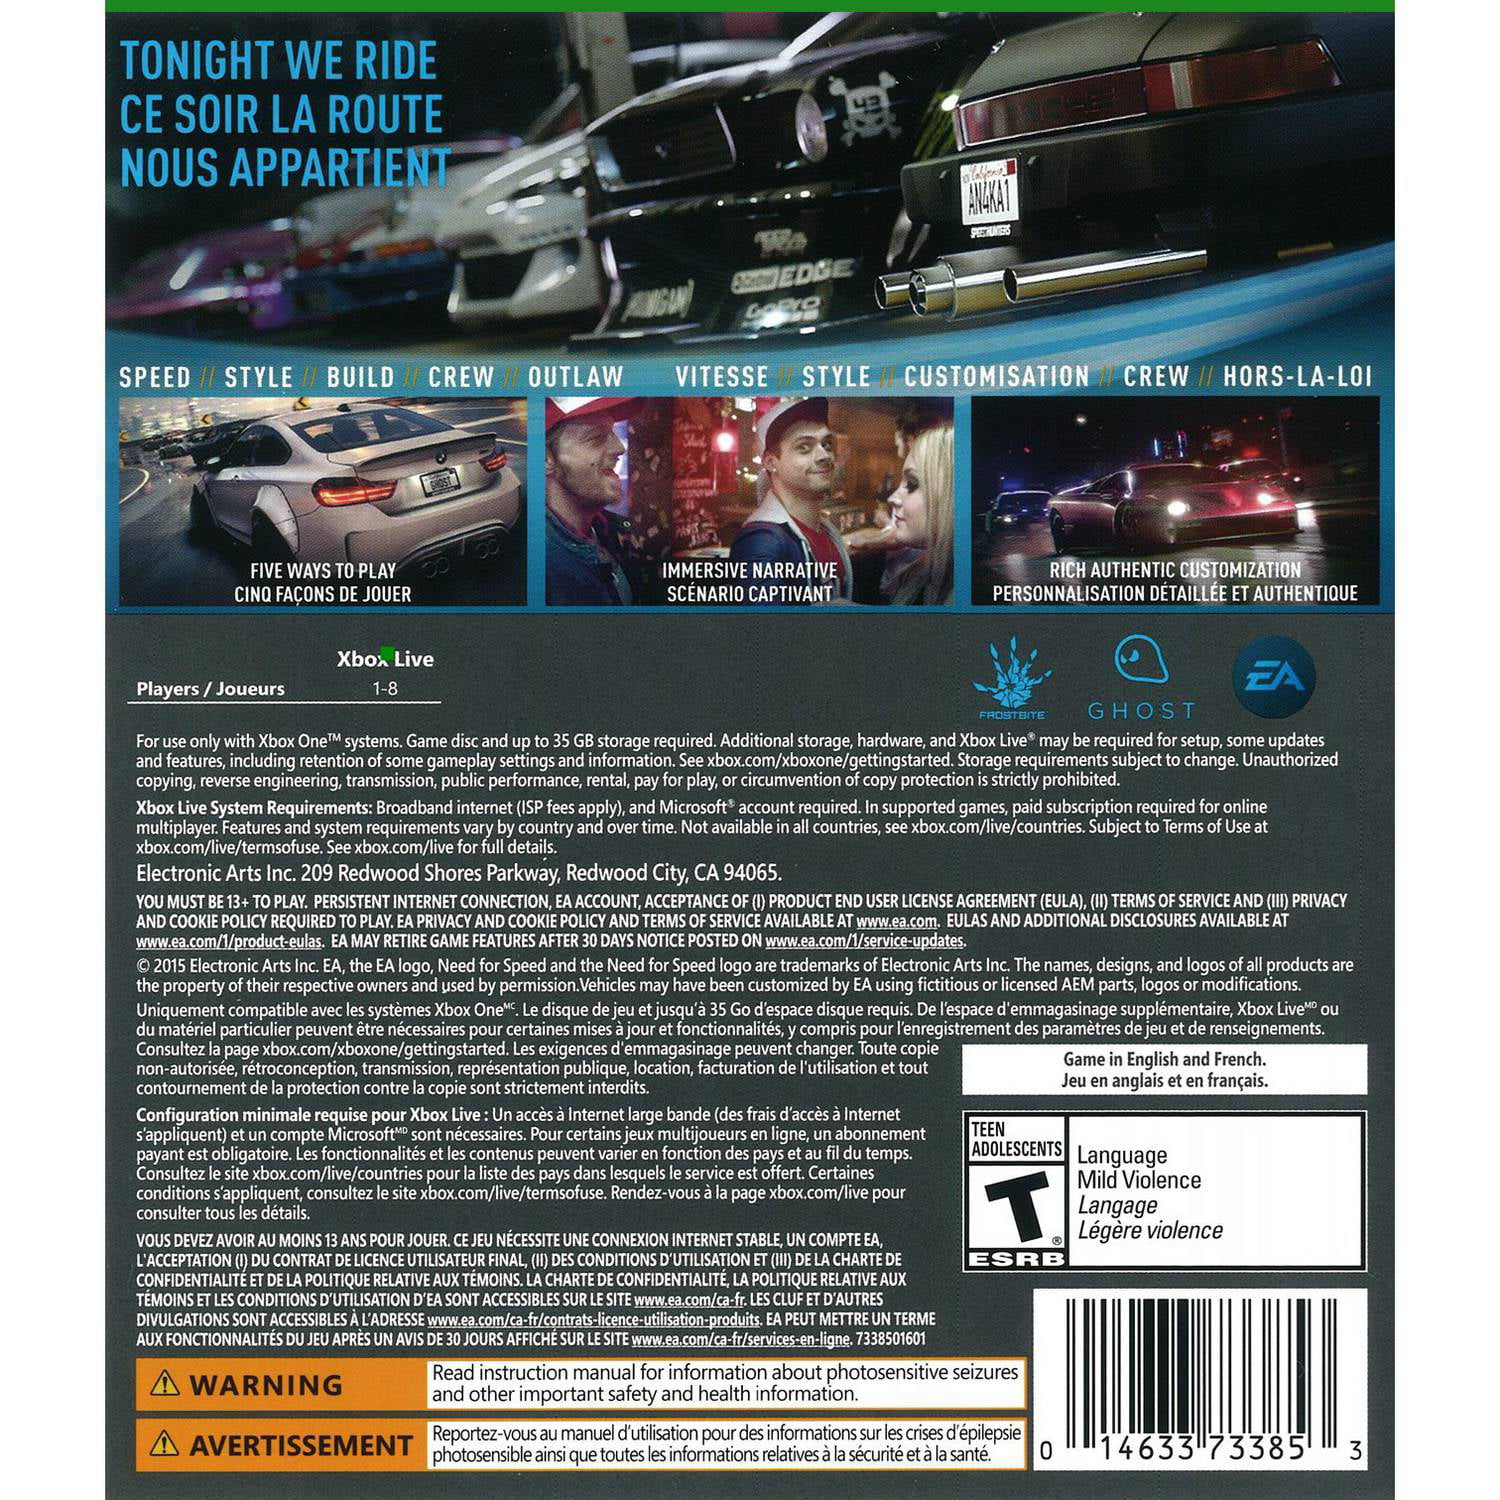 Need for Speed Rivals (XBOX ONE) cheap - Price of $4.91